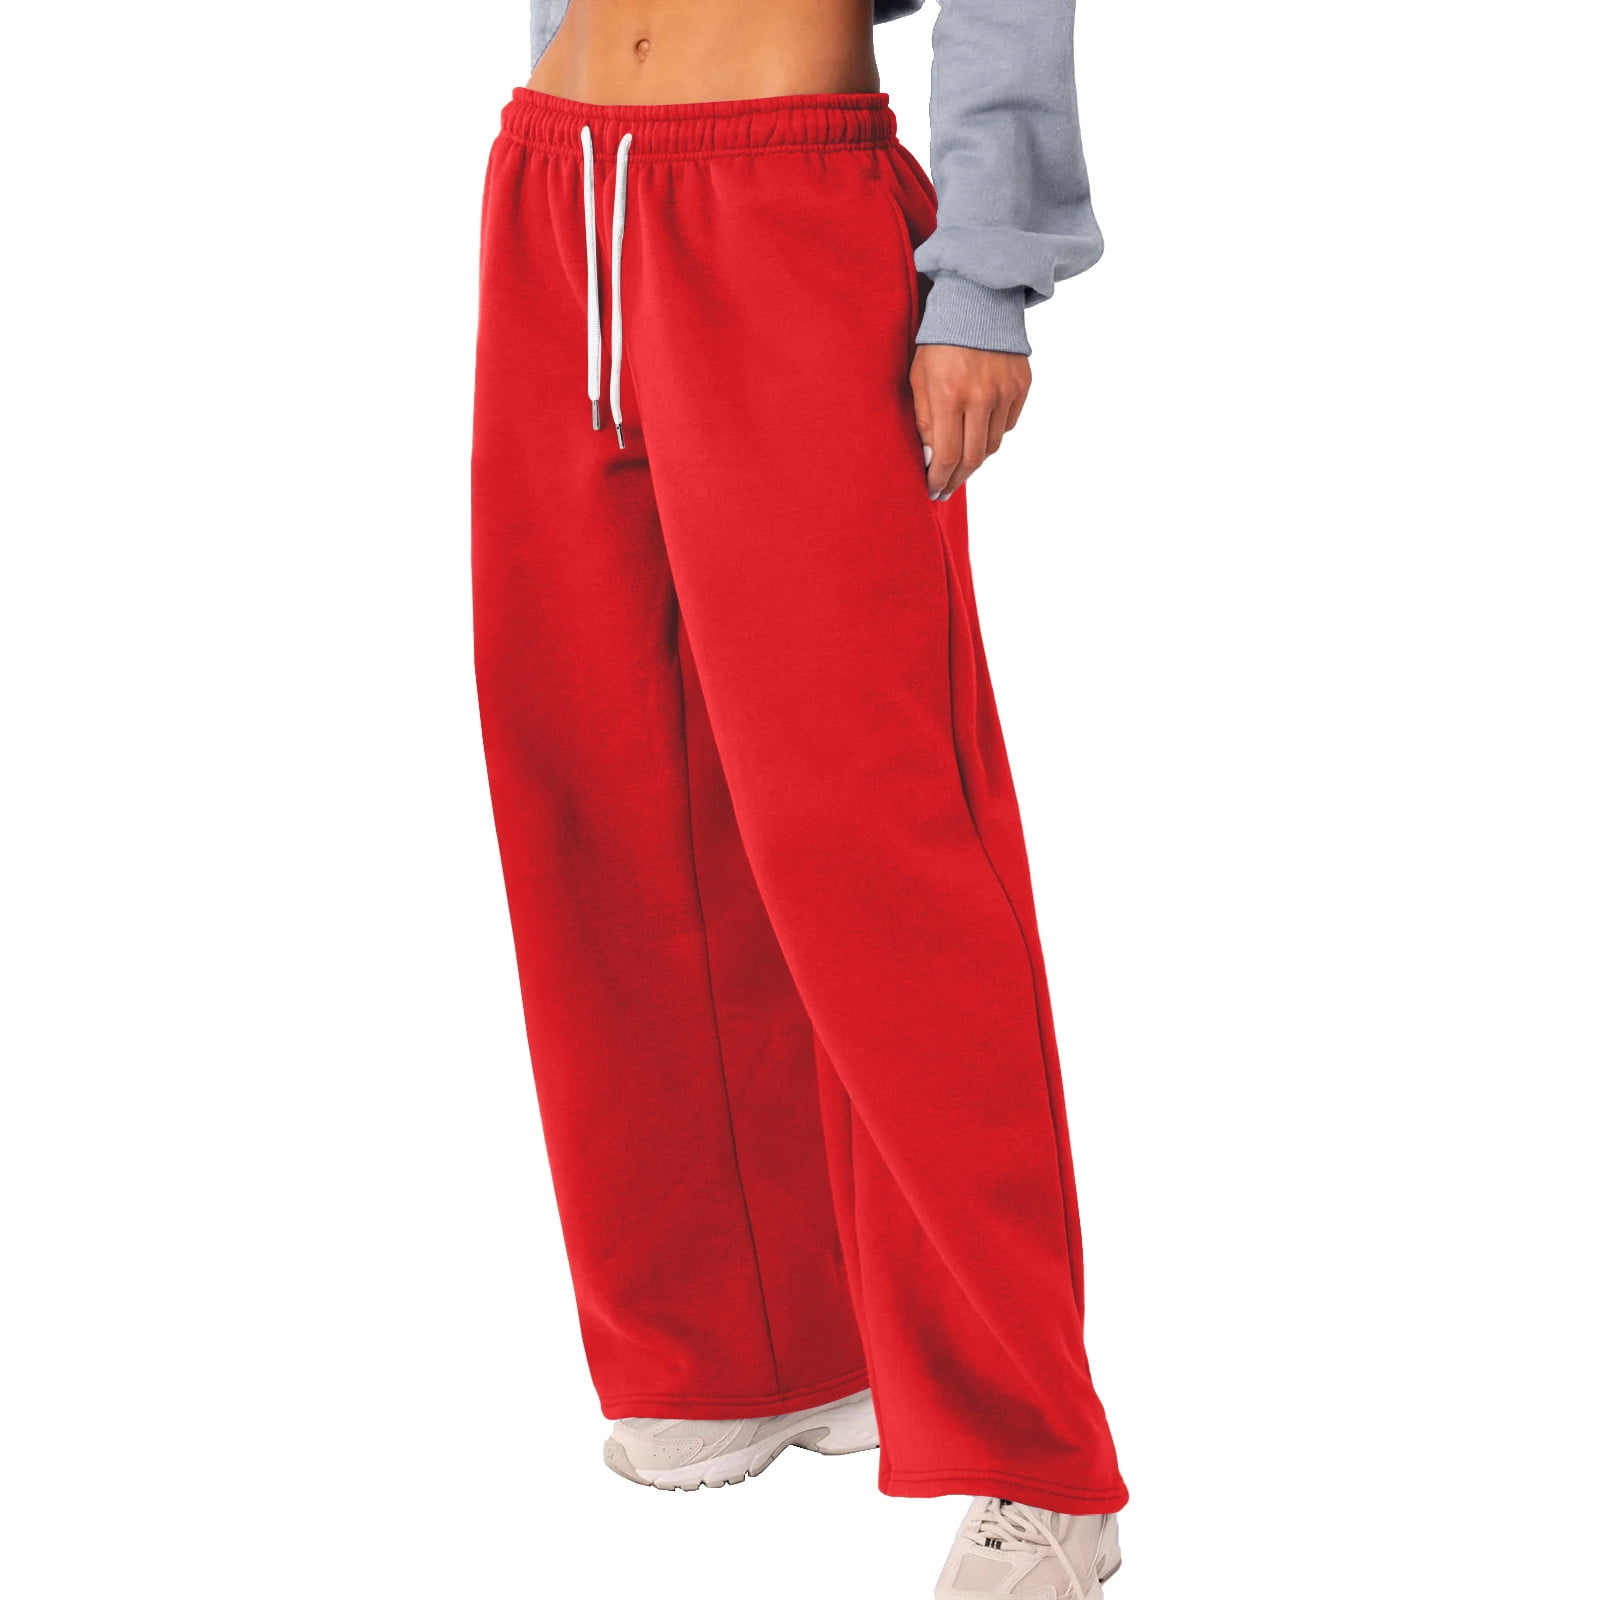  IMUZYN Active Sweatpants for Women Joggers with Pockets High  Waisted Workout Sports Yoga Pants Athletic Running Lounge Pants Dark red S  : Sports & Outdoors